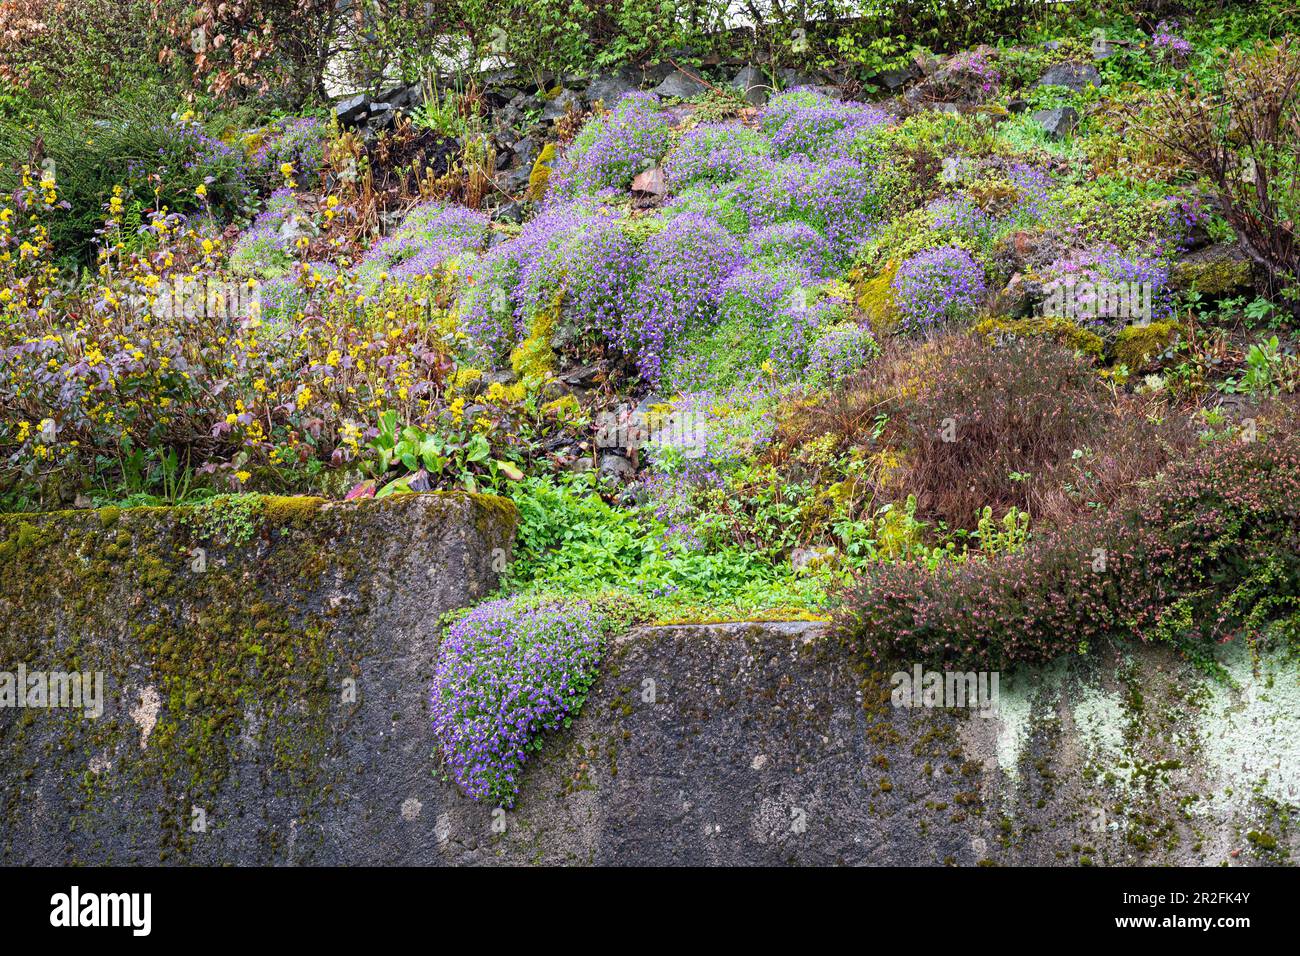 Rock garden or rockery: garden with rocks and violet flowering plants Stock Photo